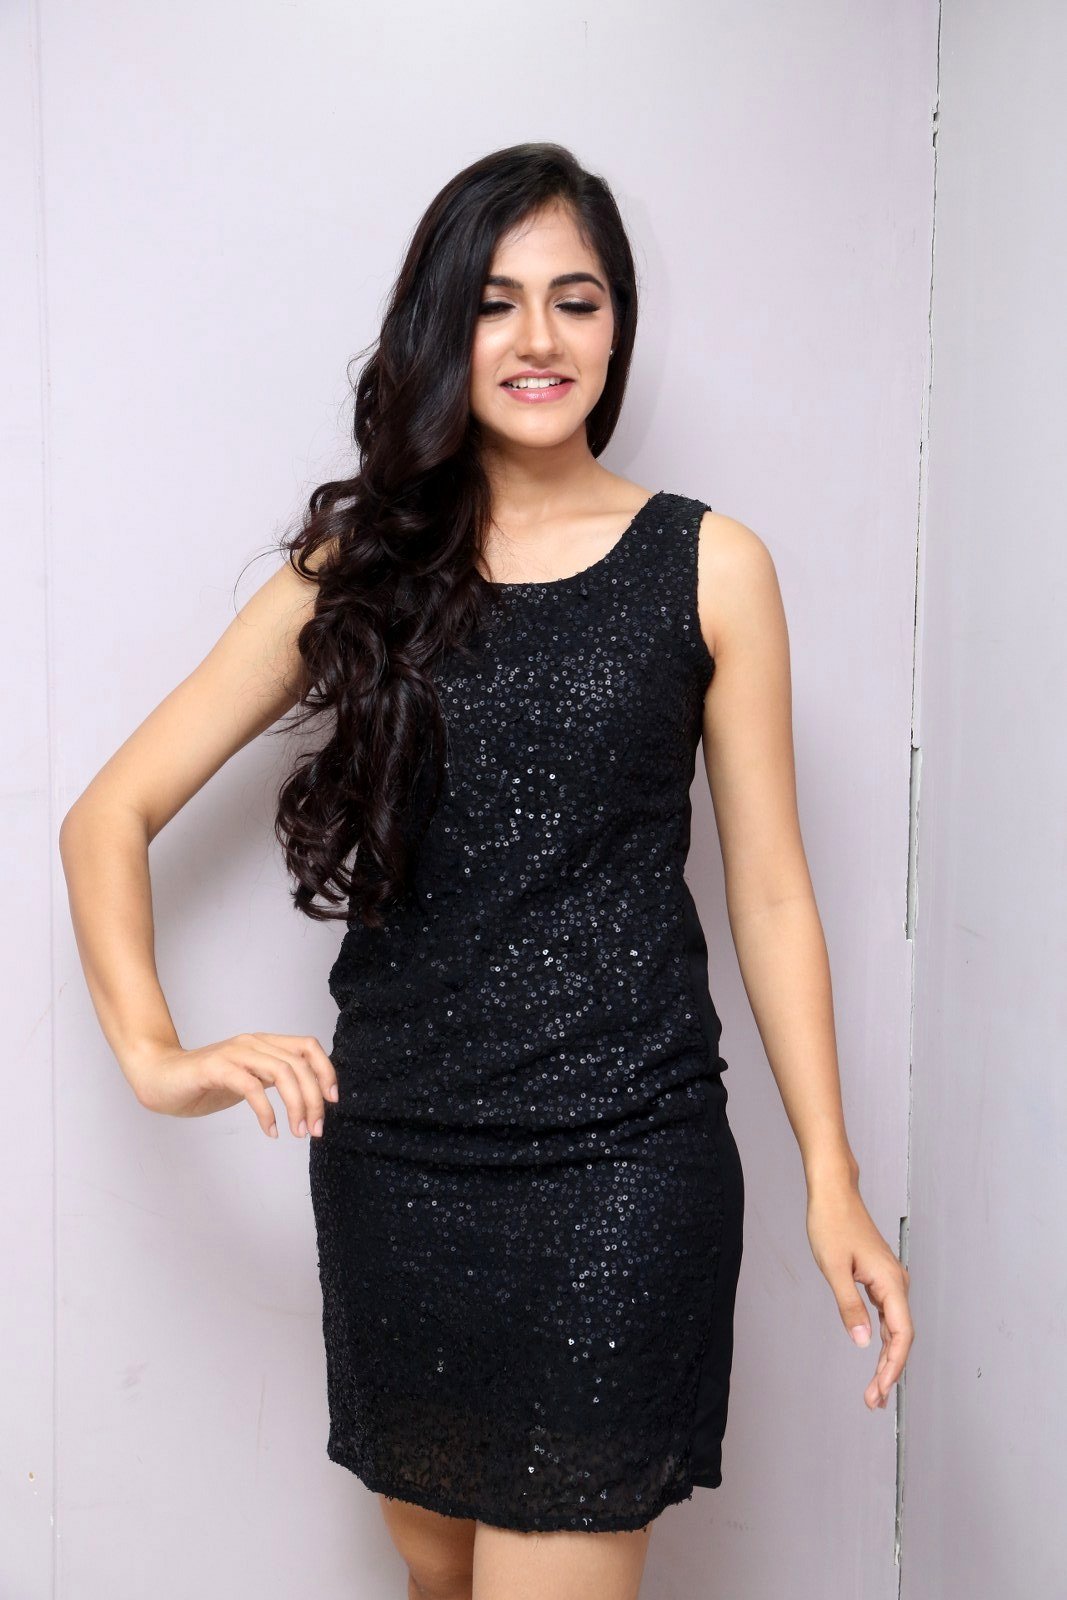 Telugu Actress Simran at Fbb Miss India Auditions Event Photos | Picture 1473468